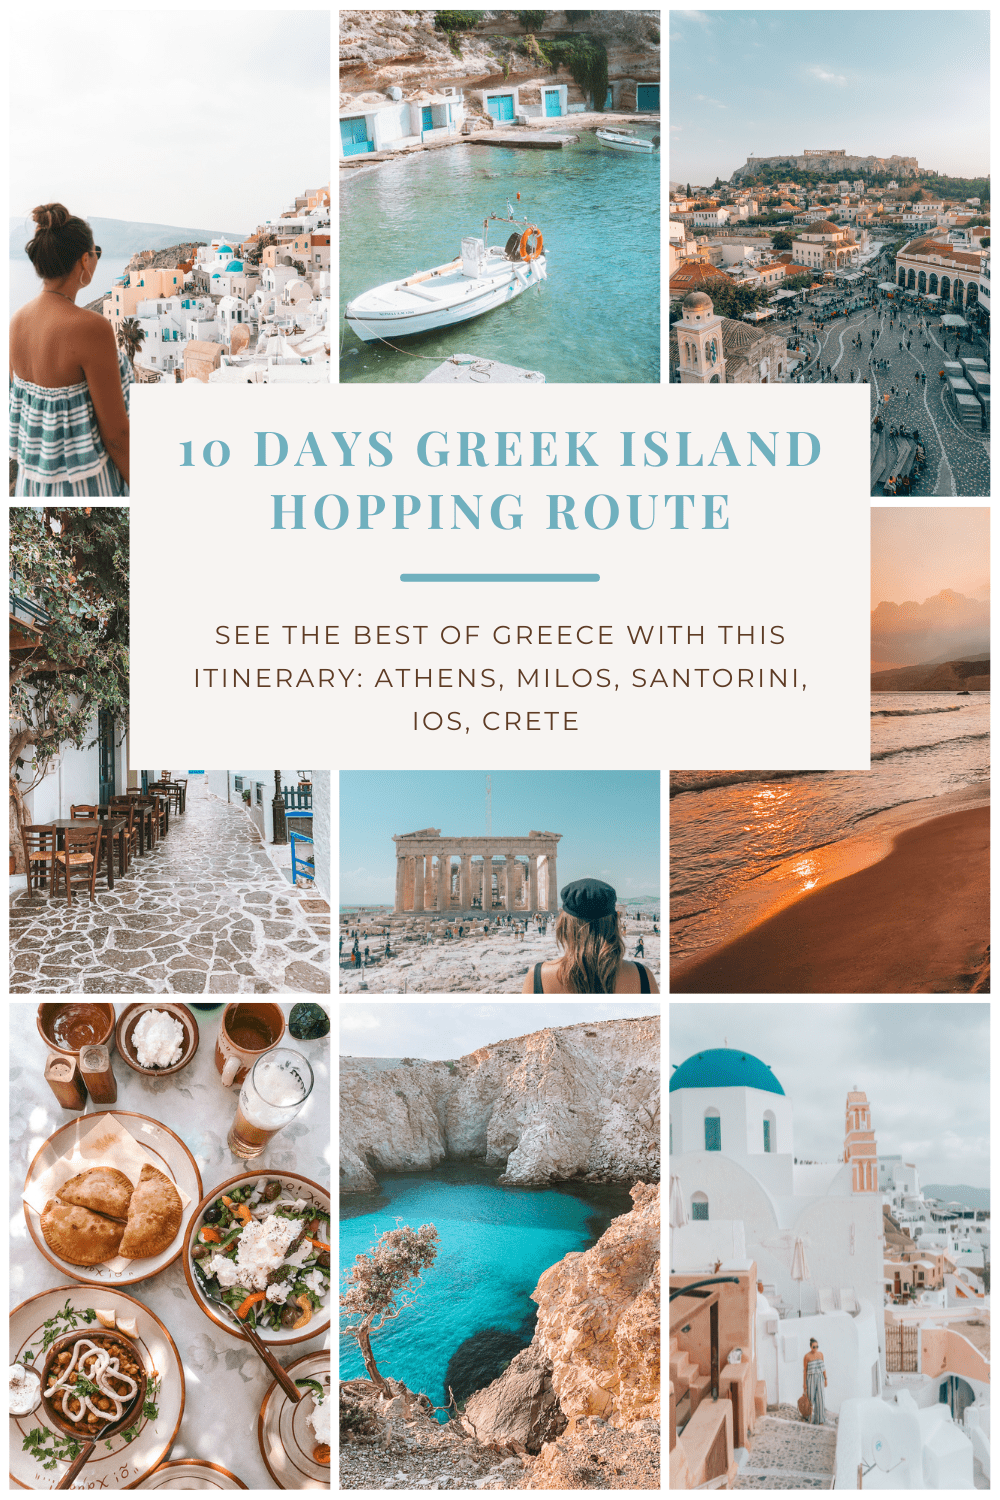 10 days Greek island hopping route with 9 photos showcasing the highlights of Greece